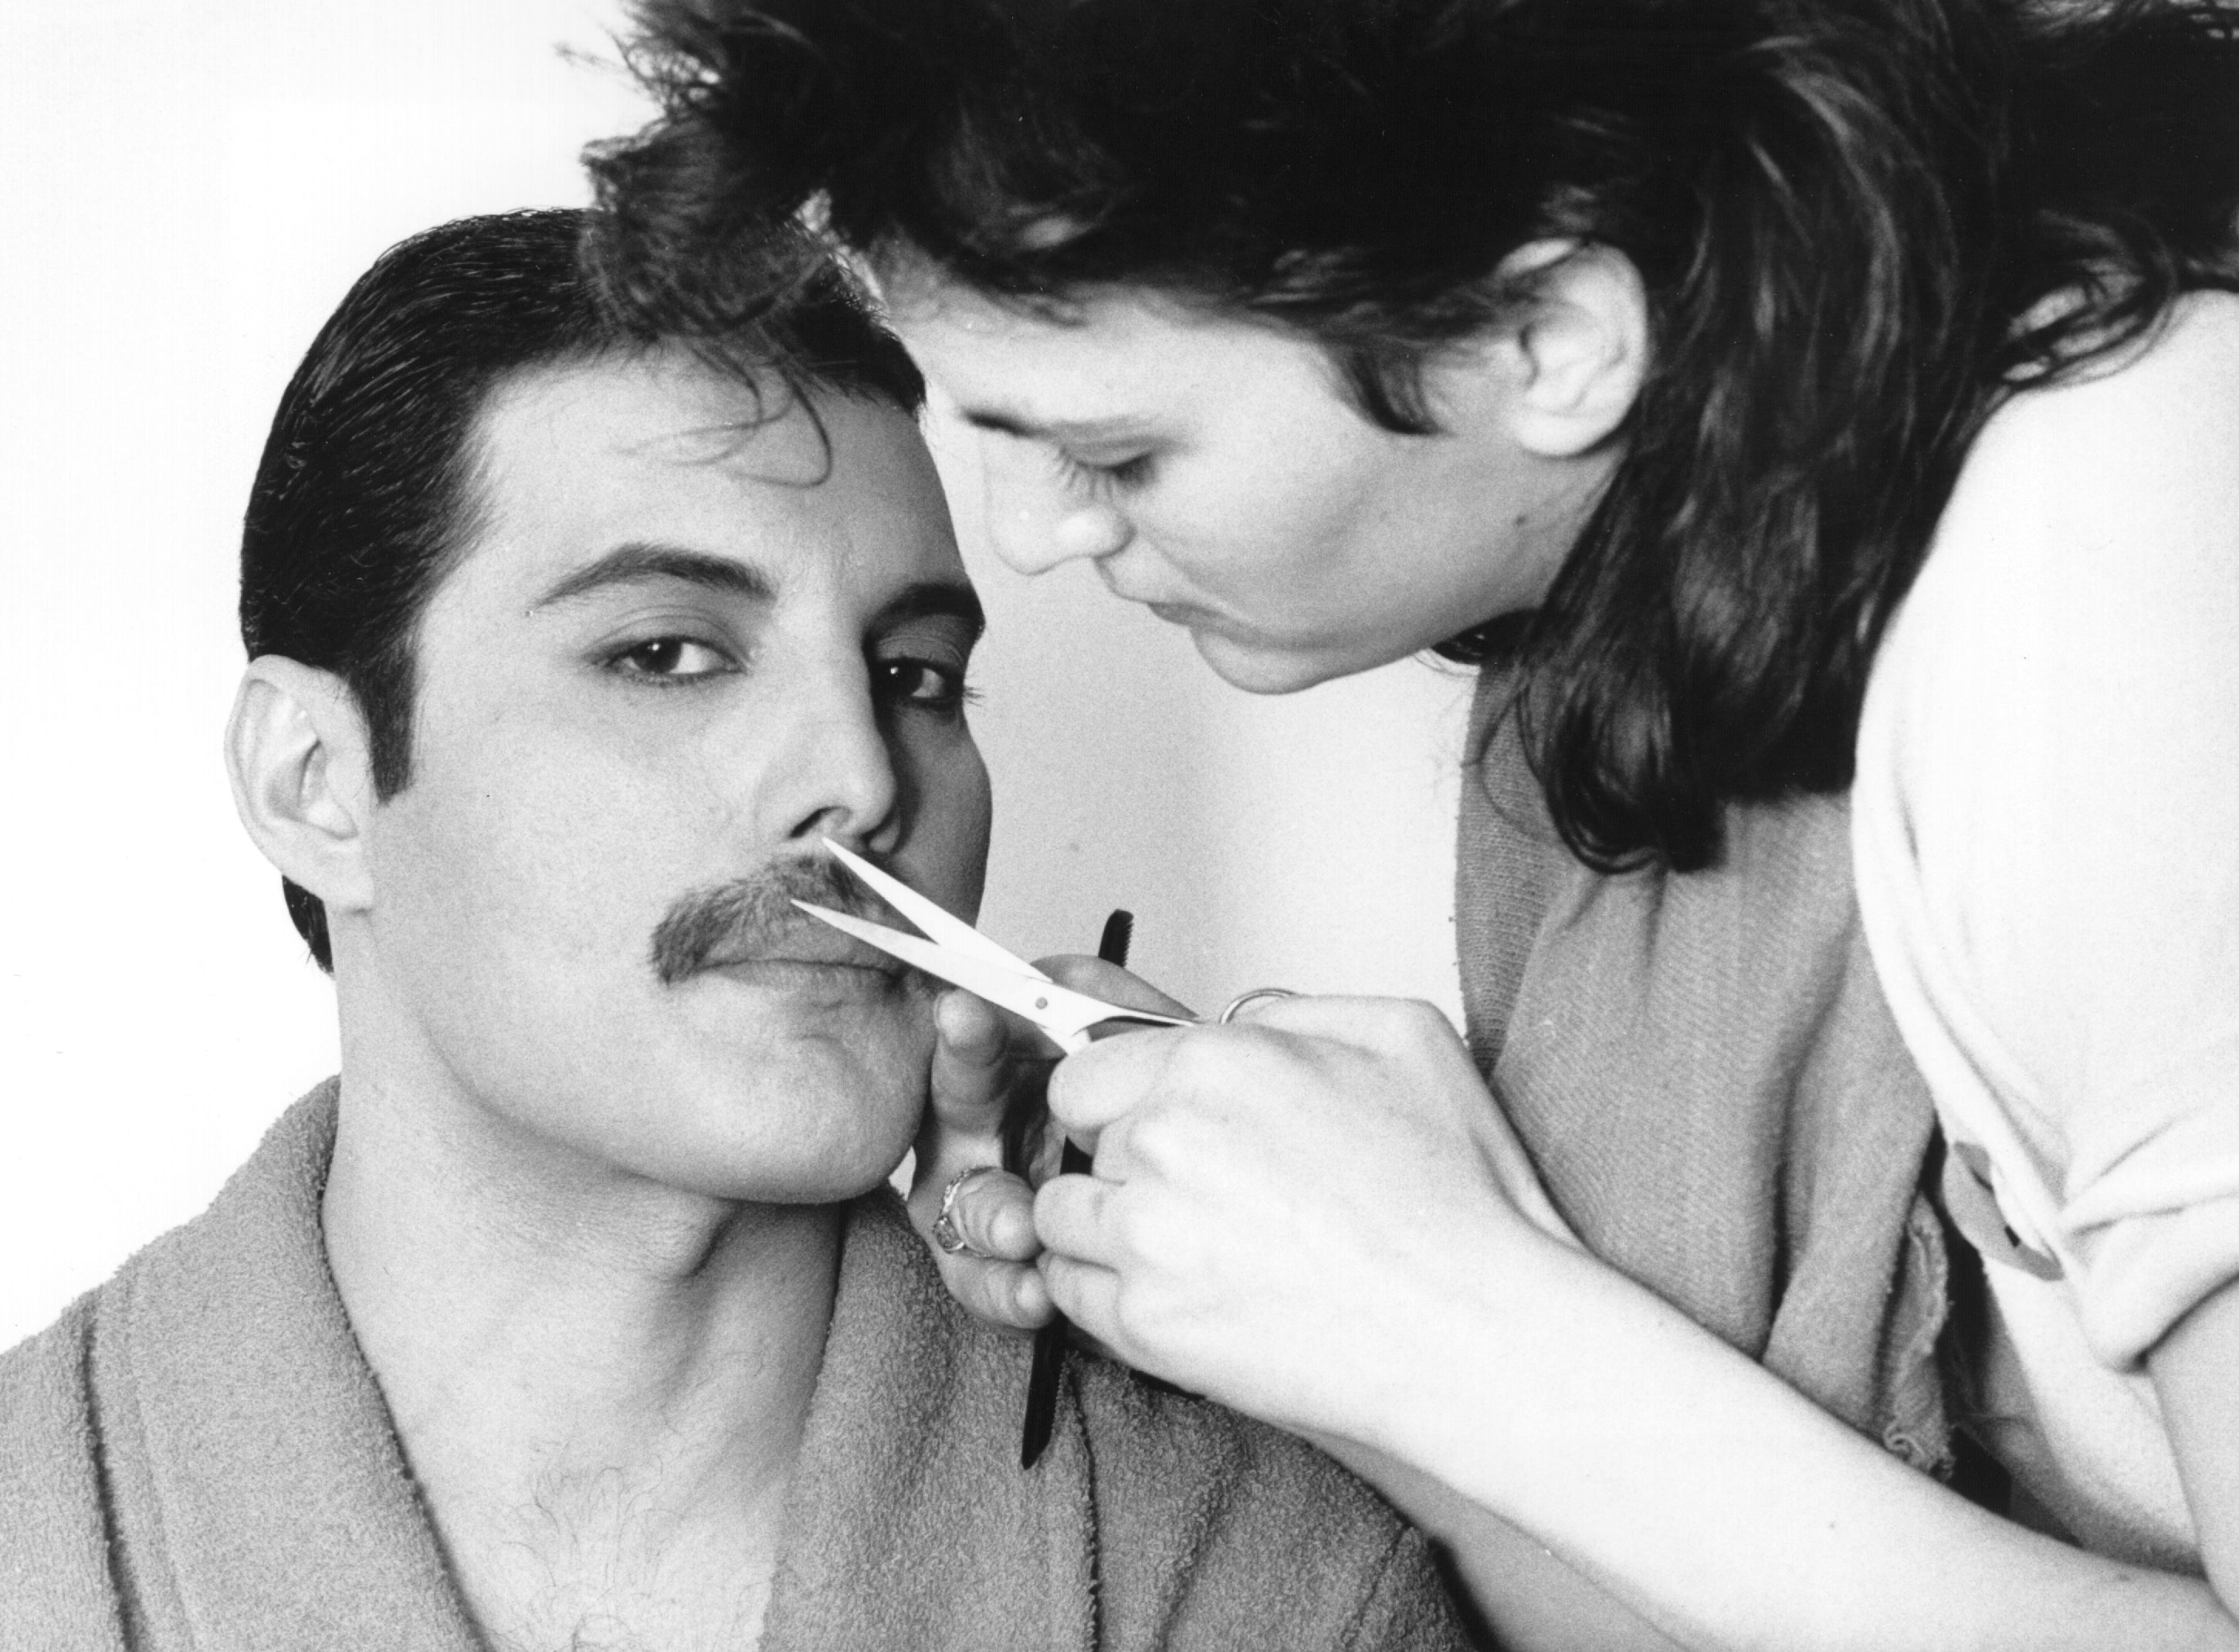 1982: Rock singer Freddie Mercury (Frederick Bulsara, 1946 - 1991), of the popular British group Queen, has his moustache groomed. (Photo by Steve Wood/Express/Getty Images)